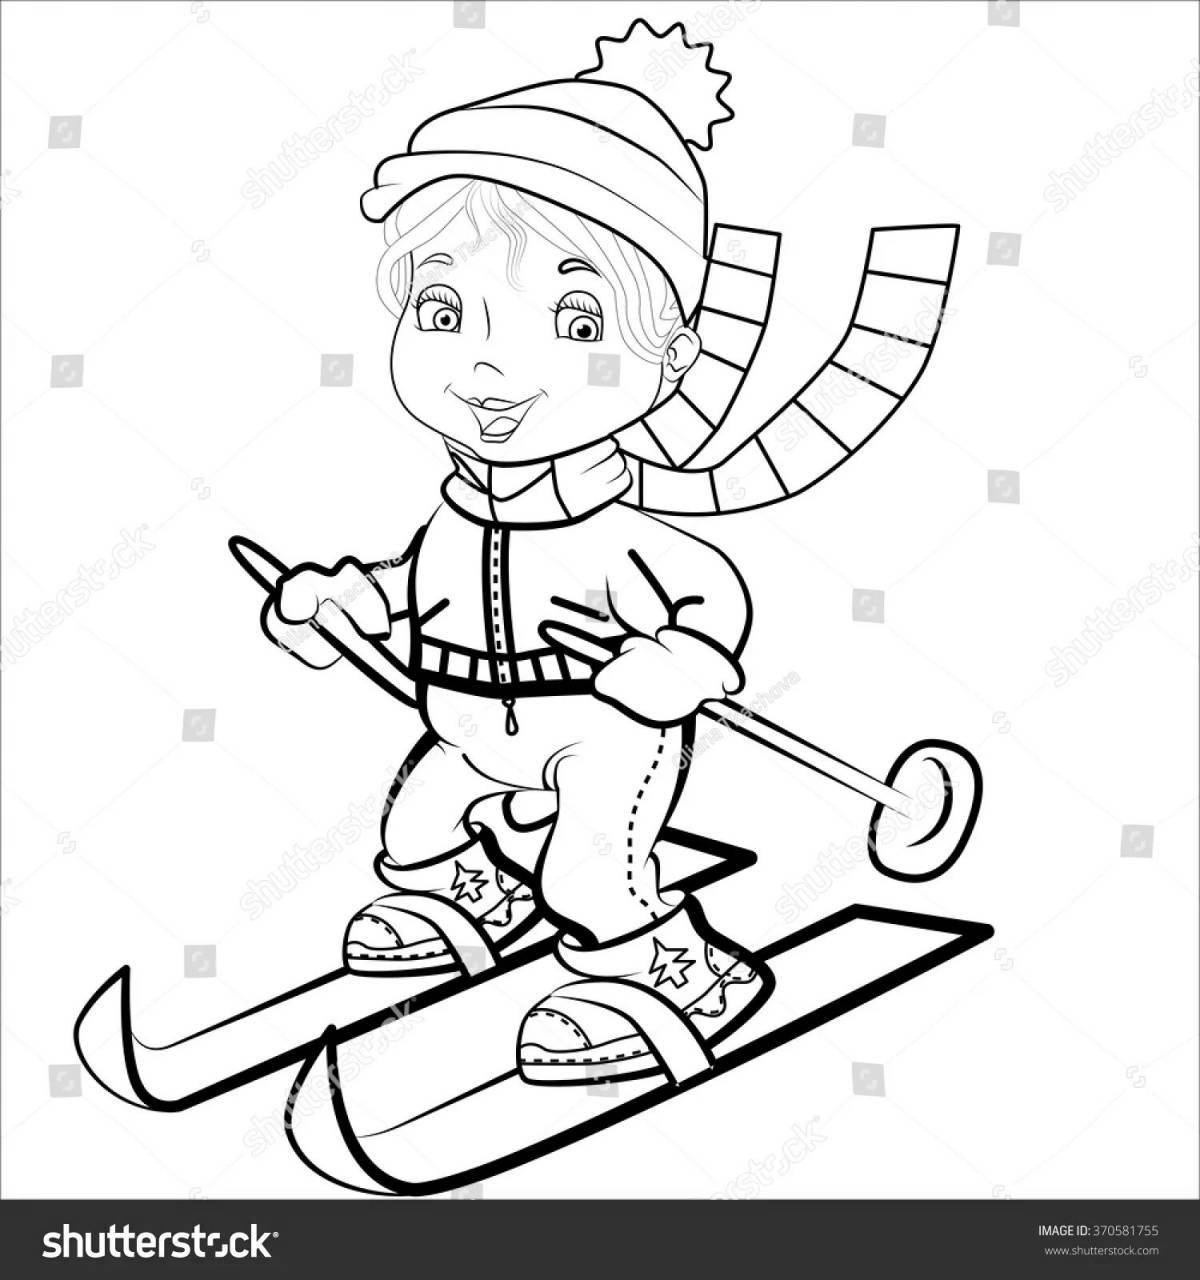 Coloring page brave boy skiing